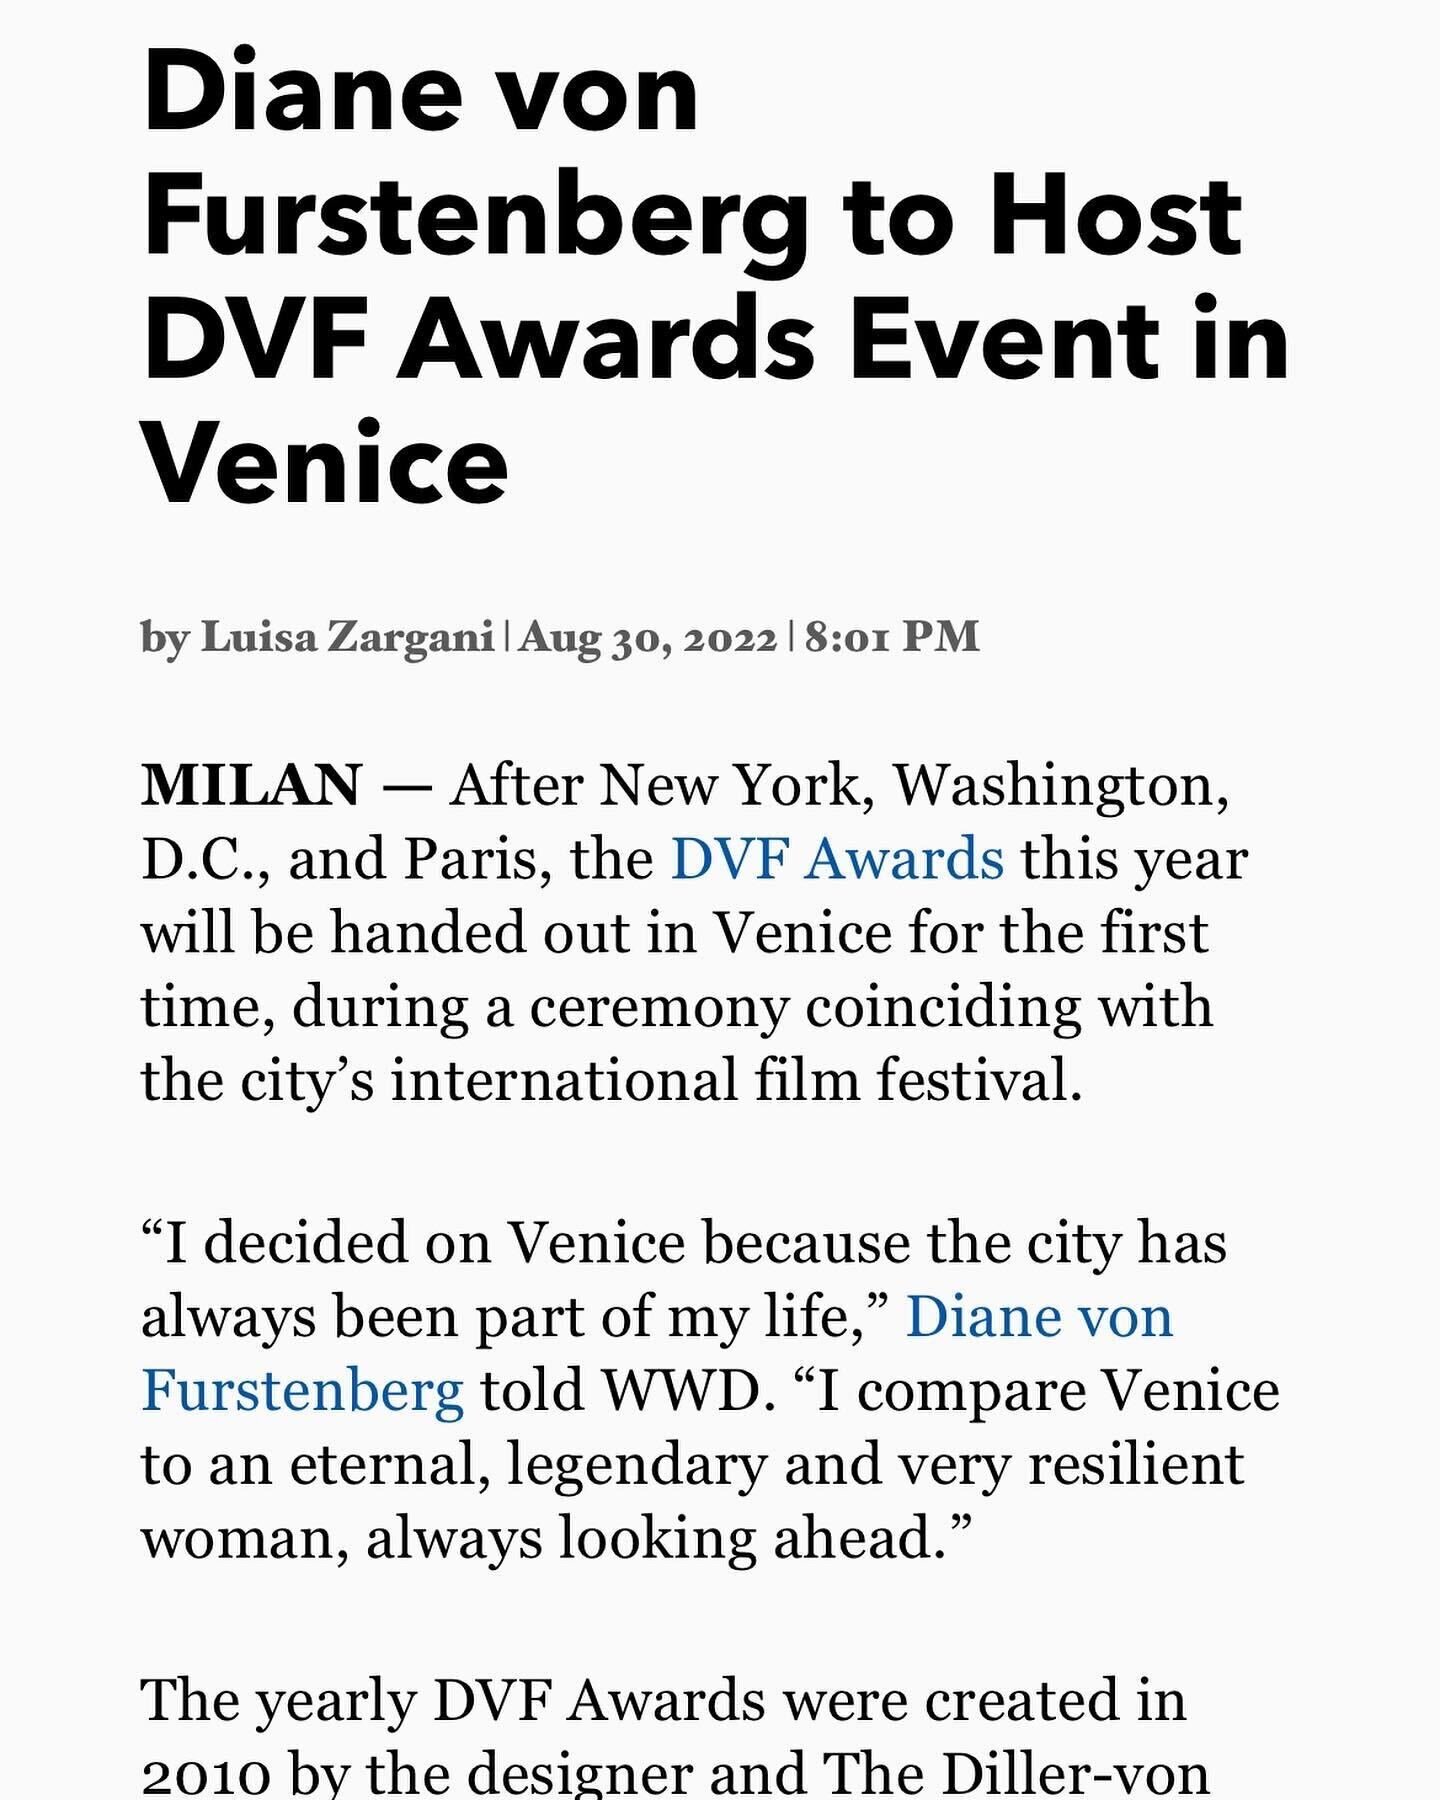 How cool! The #DVF Awards will be held in Venice this year! We can't wait to host DVF's Trunk show in October! Check the link in the bio for the news story! #DVFinSTL